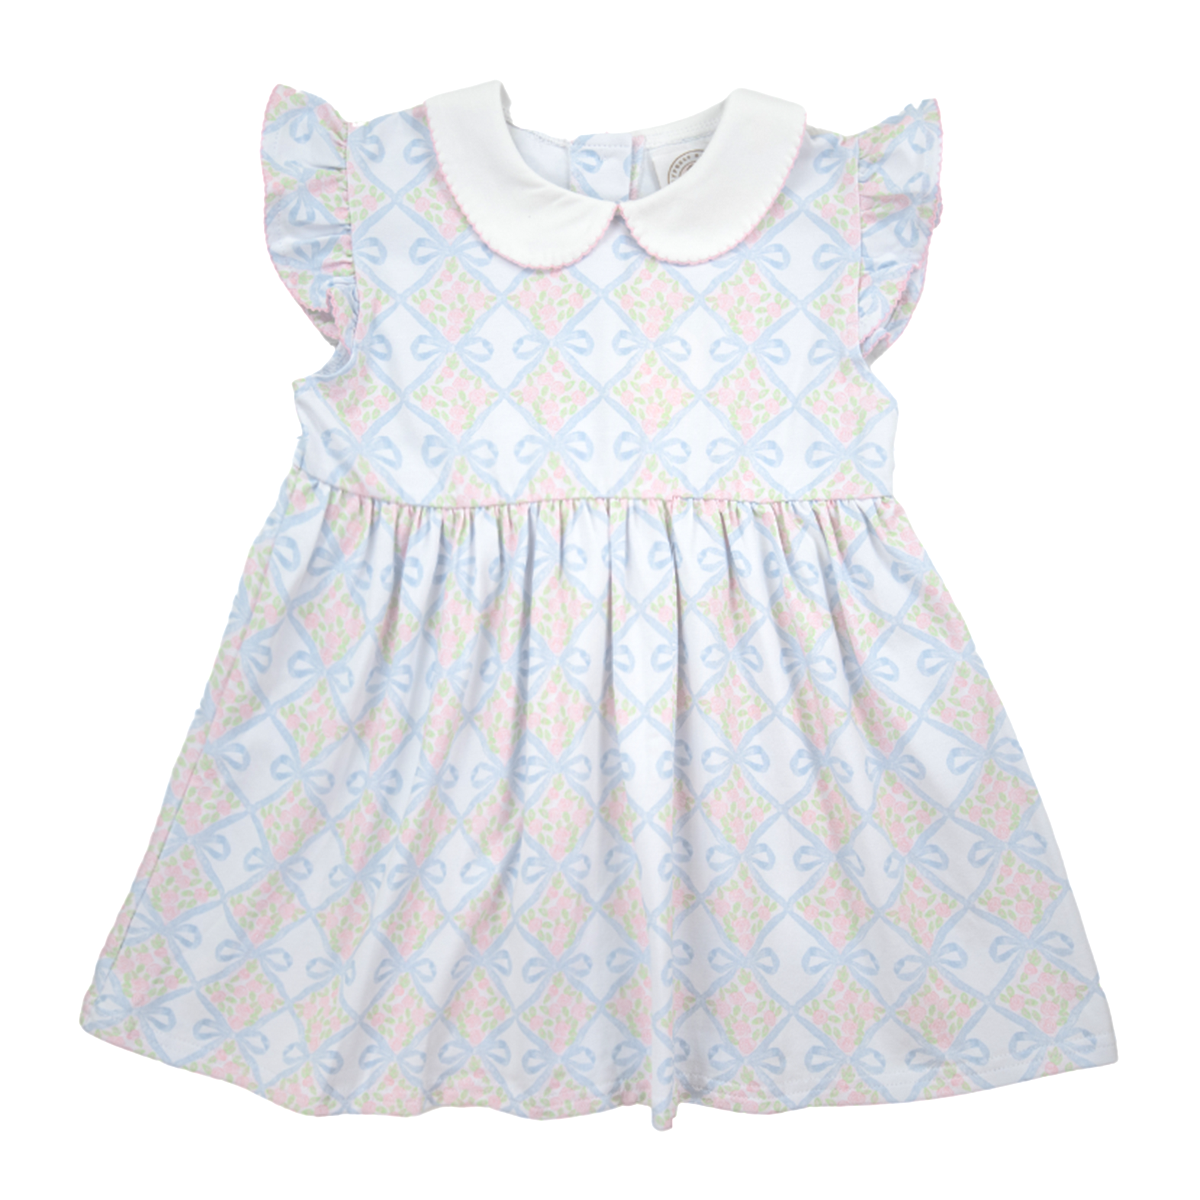 Toddler Girl's Dottie Floral Block Dress by Cypress Row